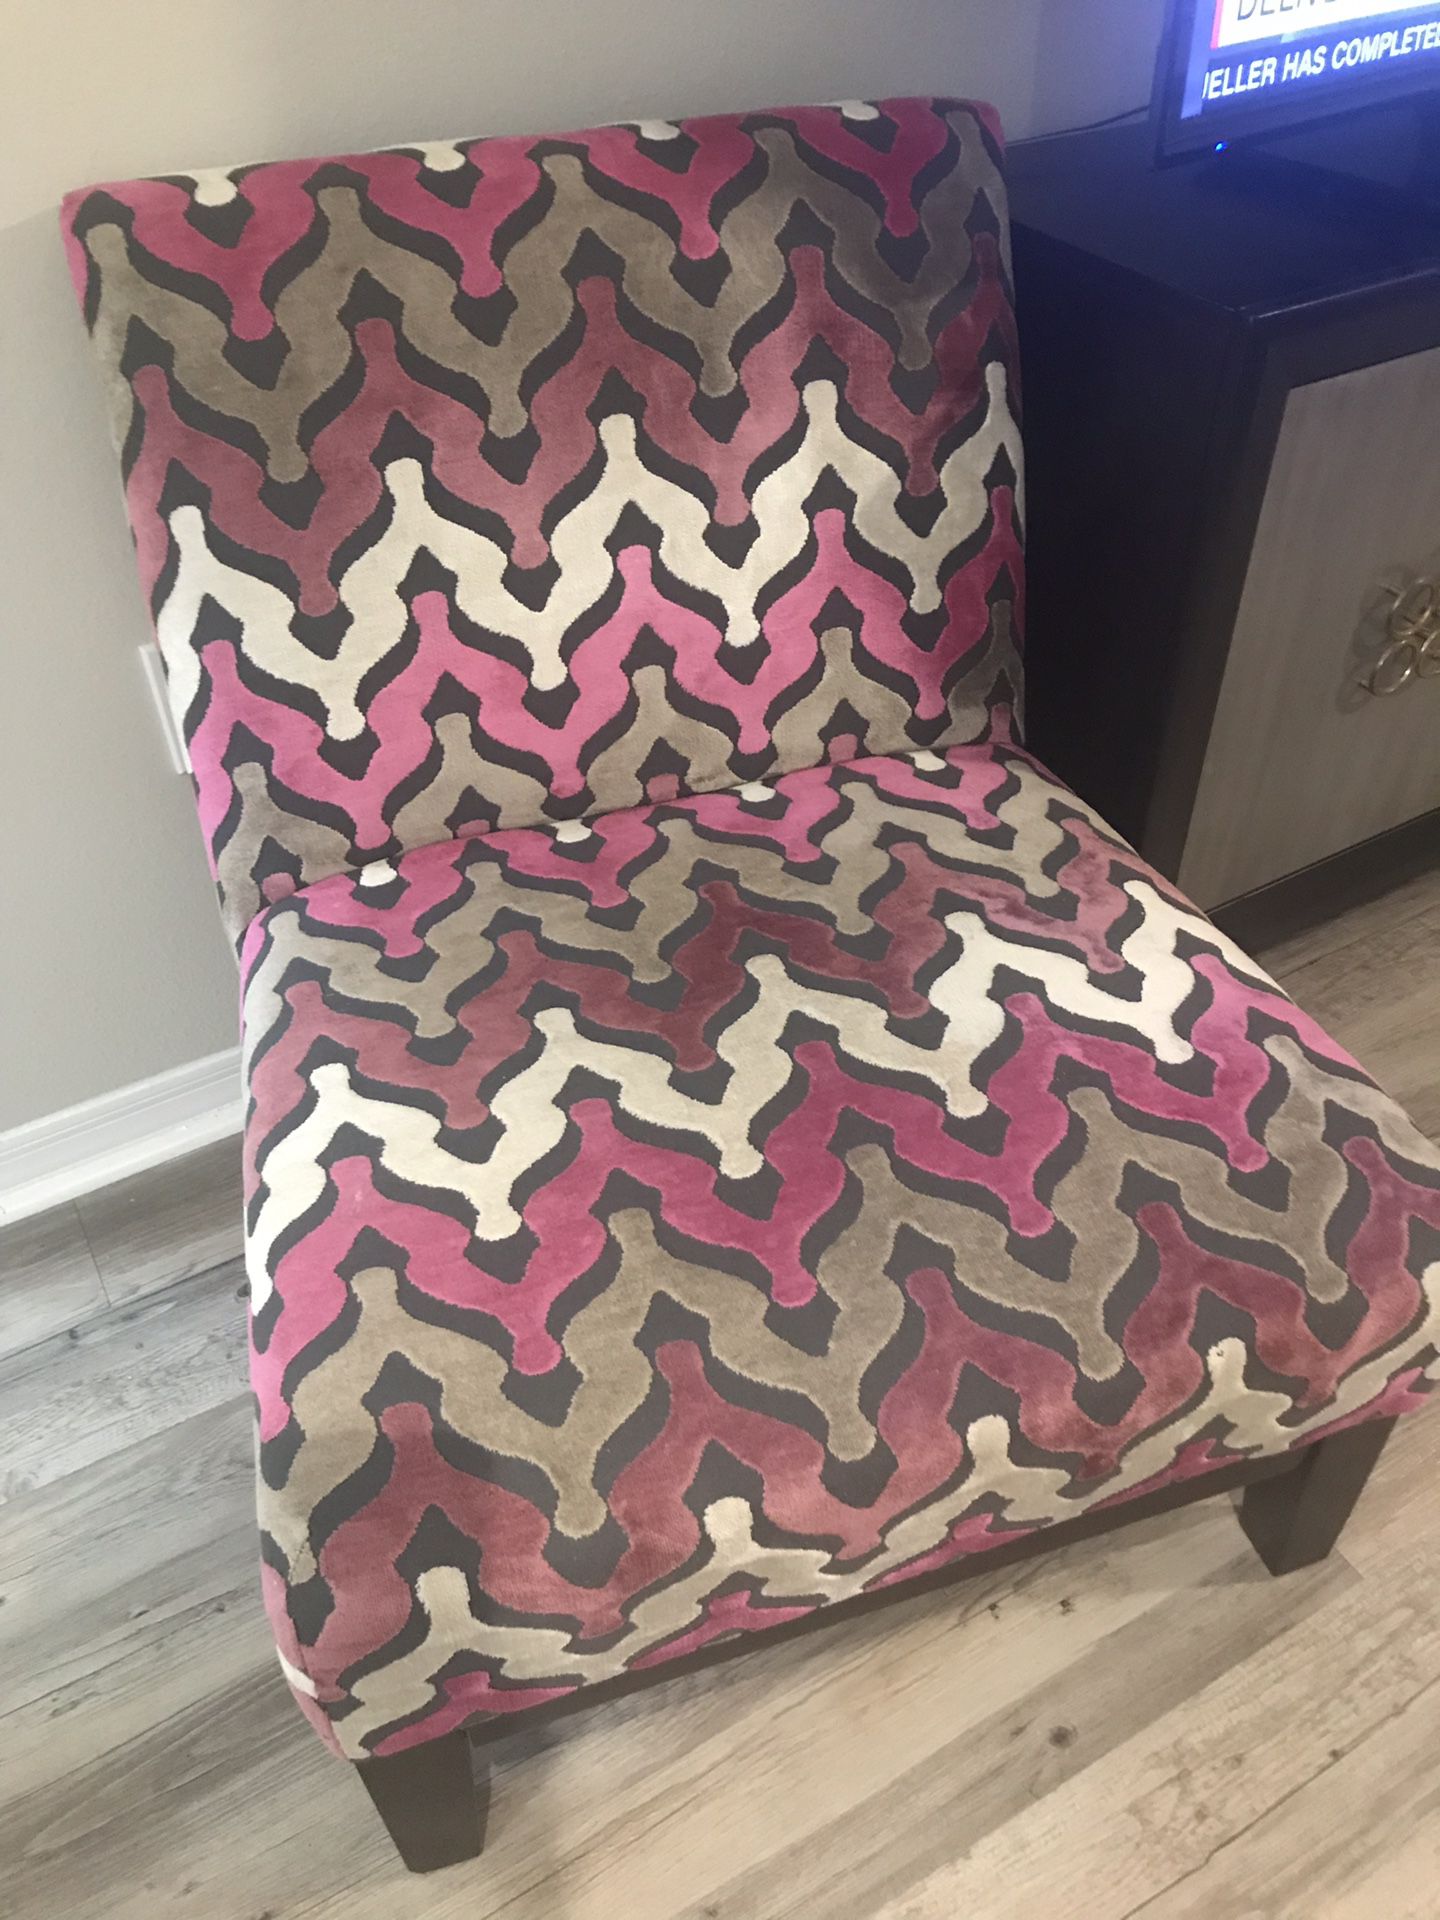 Fashionable Chair in Great Condition REDUCED $50